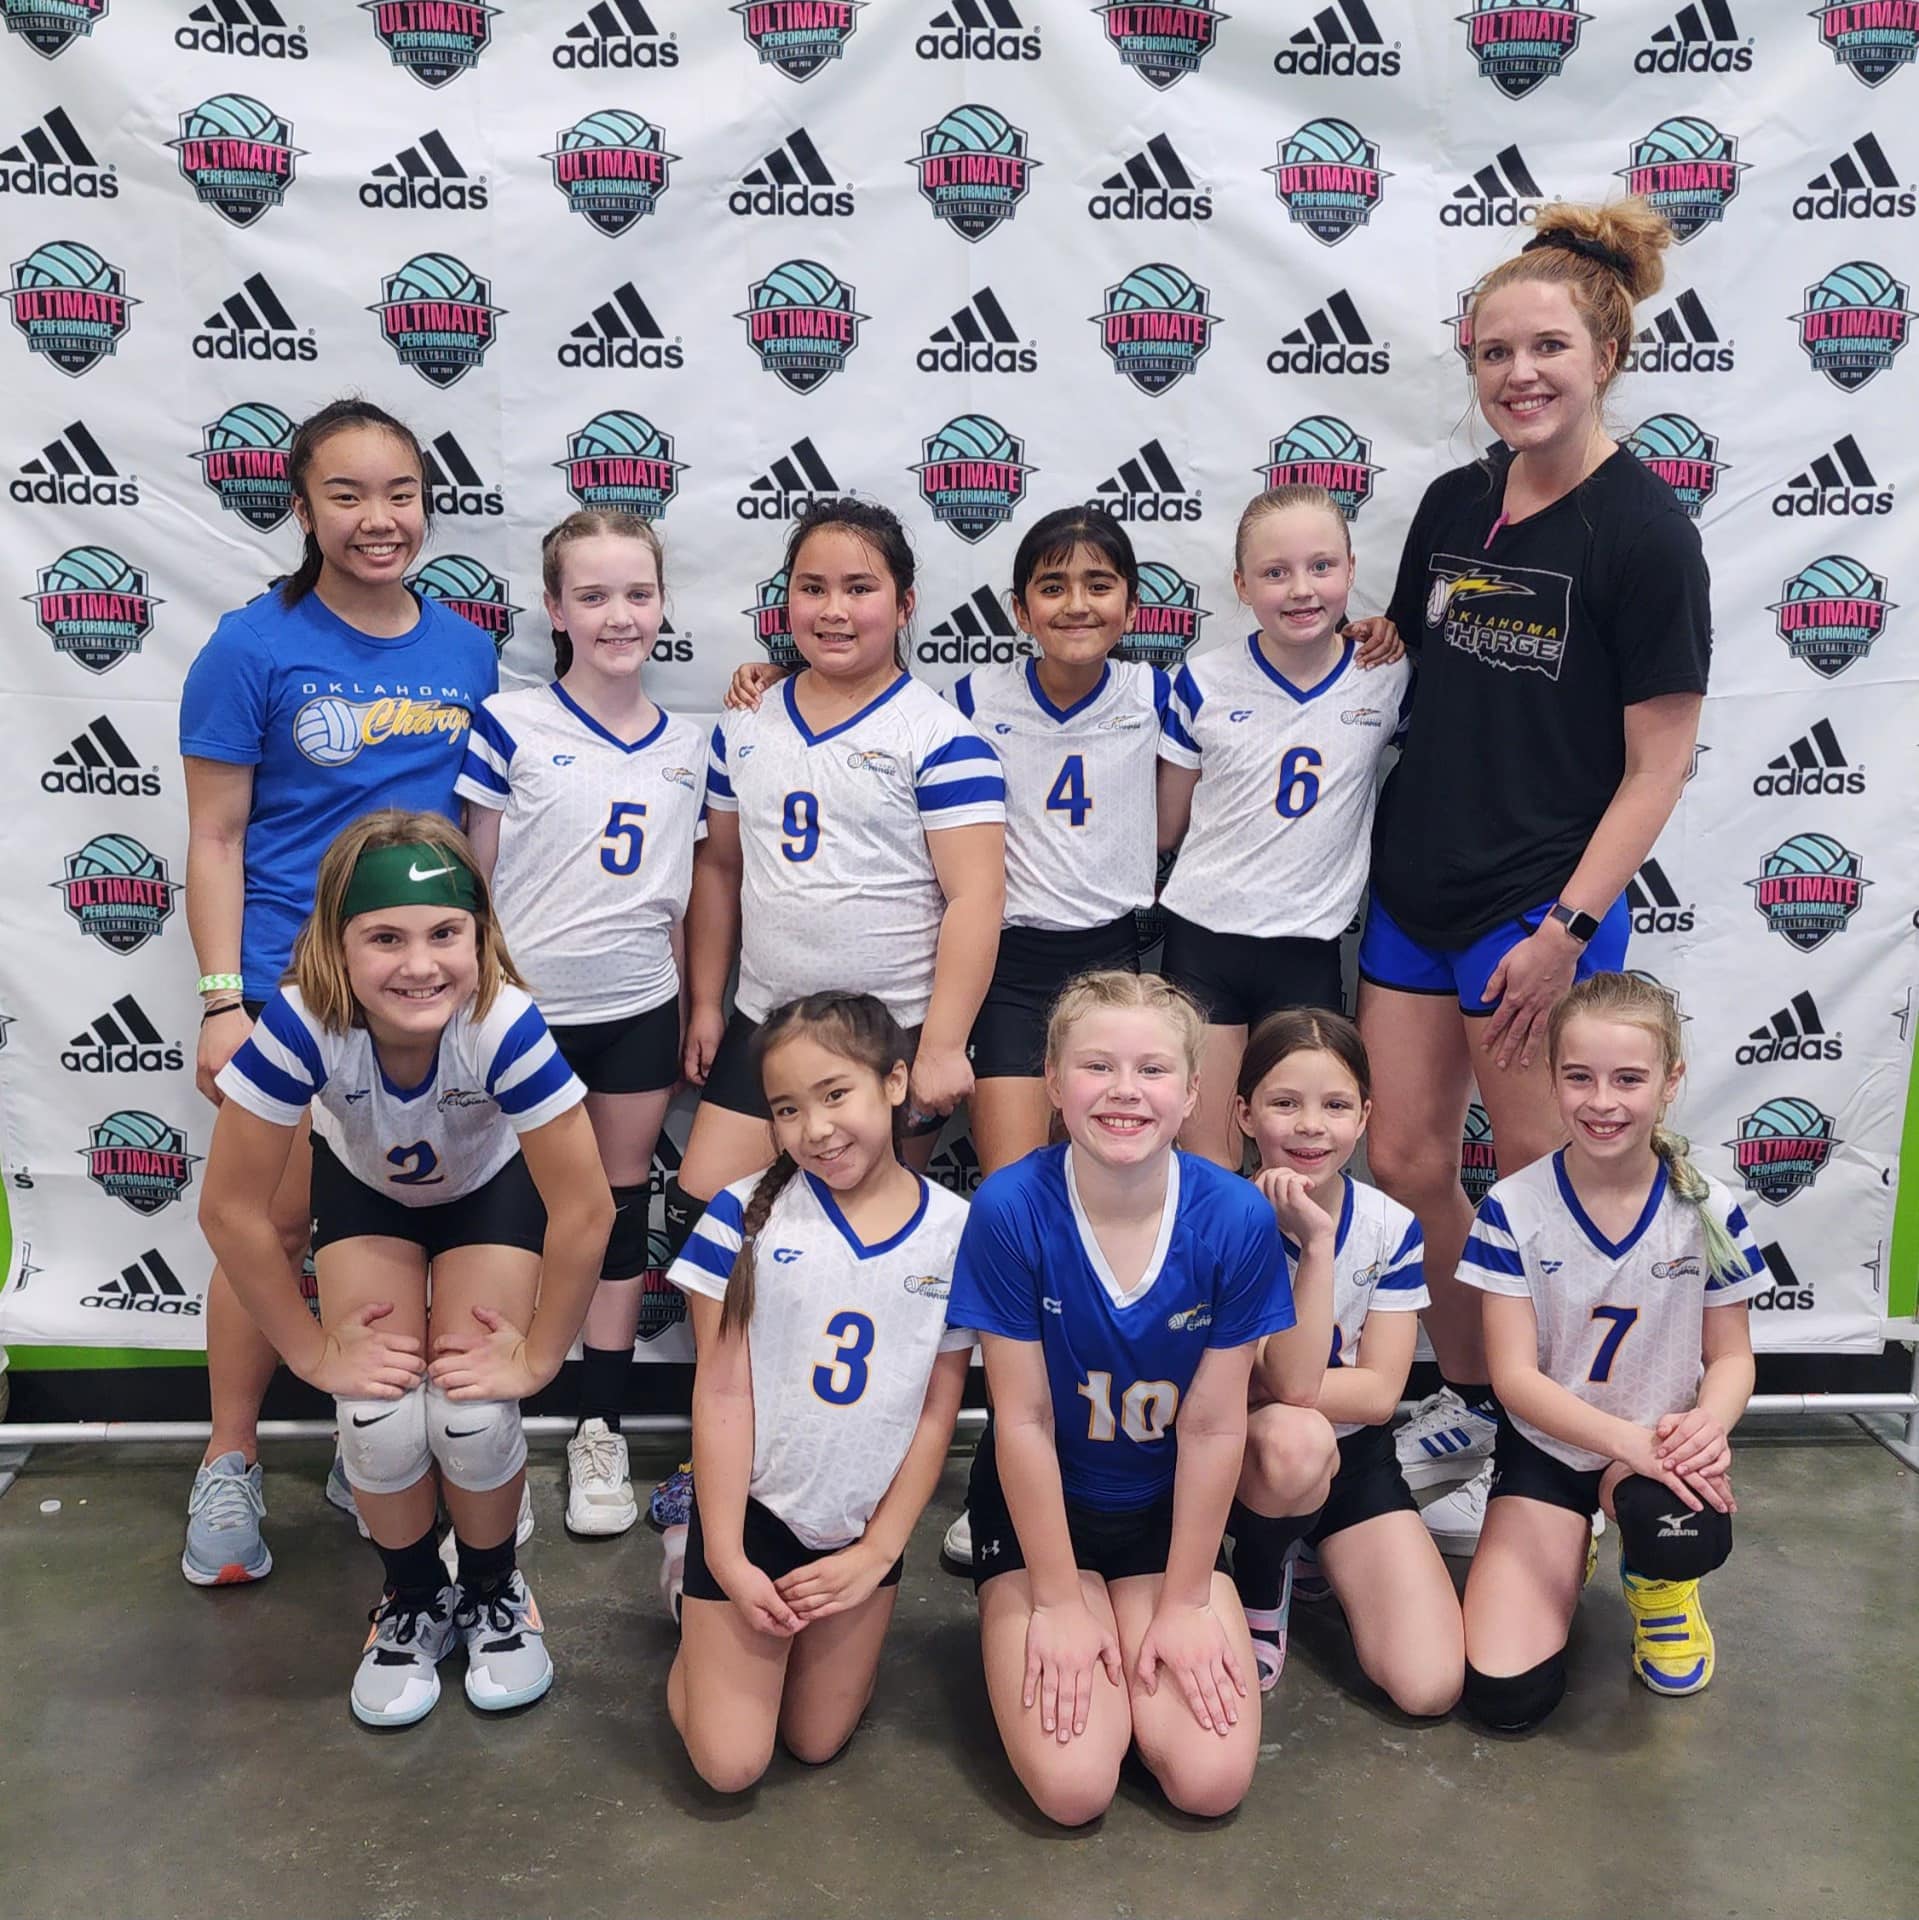 10UA - 3rd place in 11s division - The Big Show